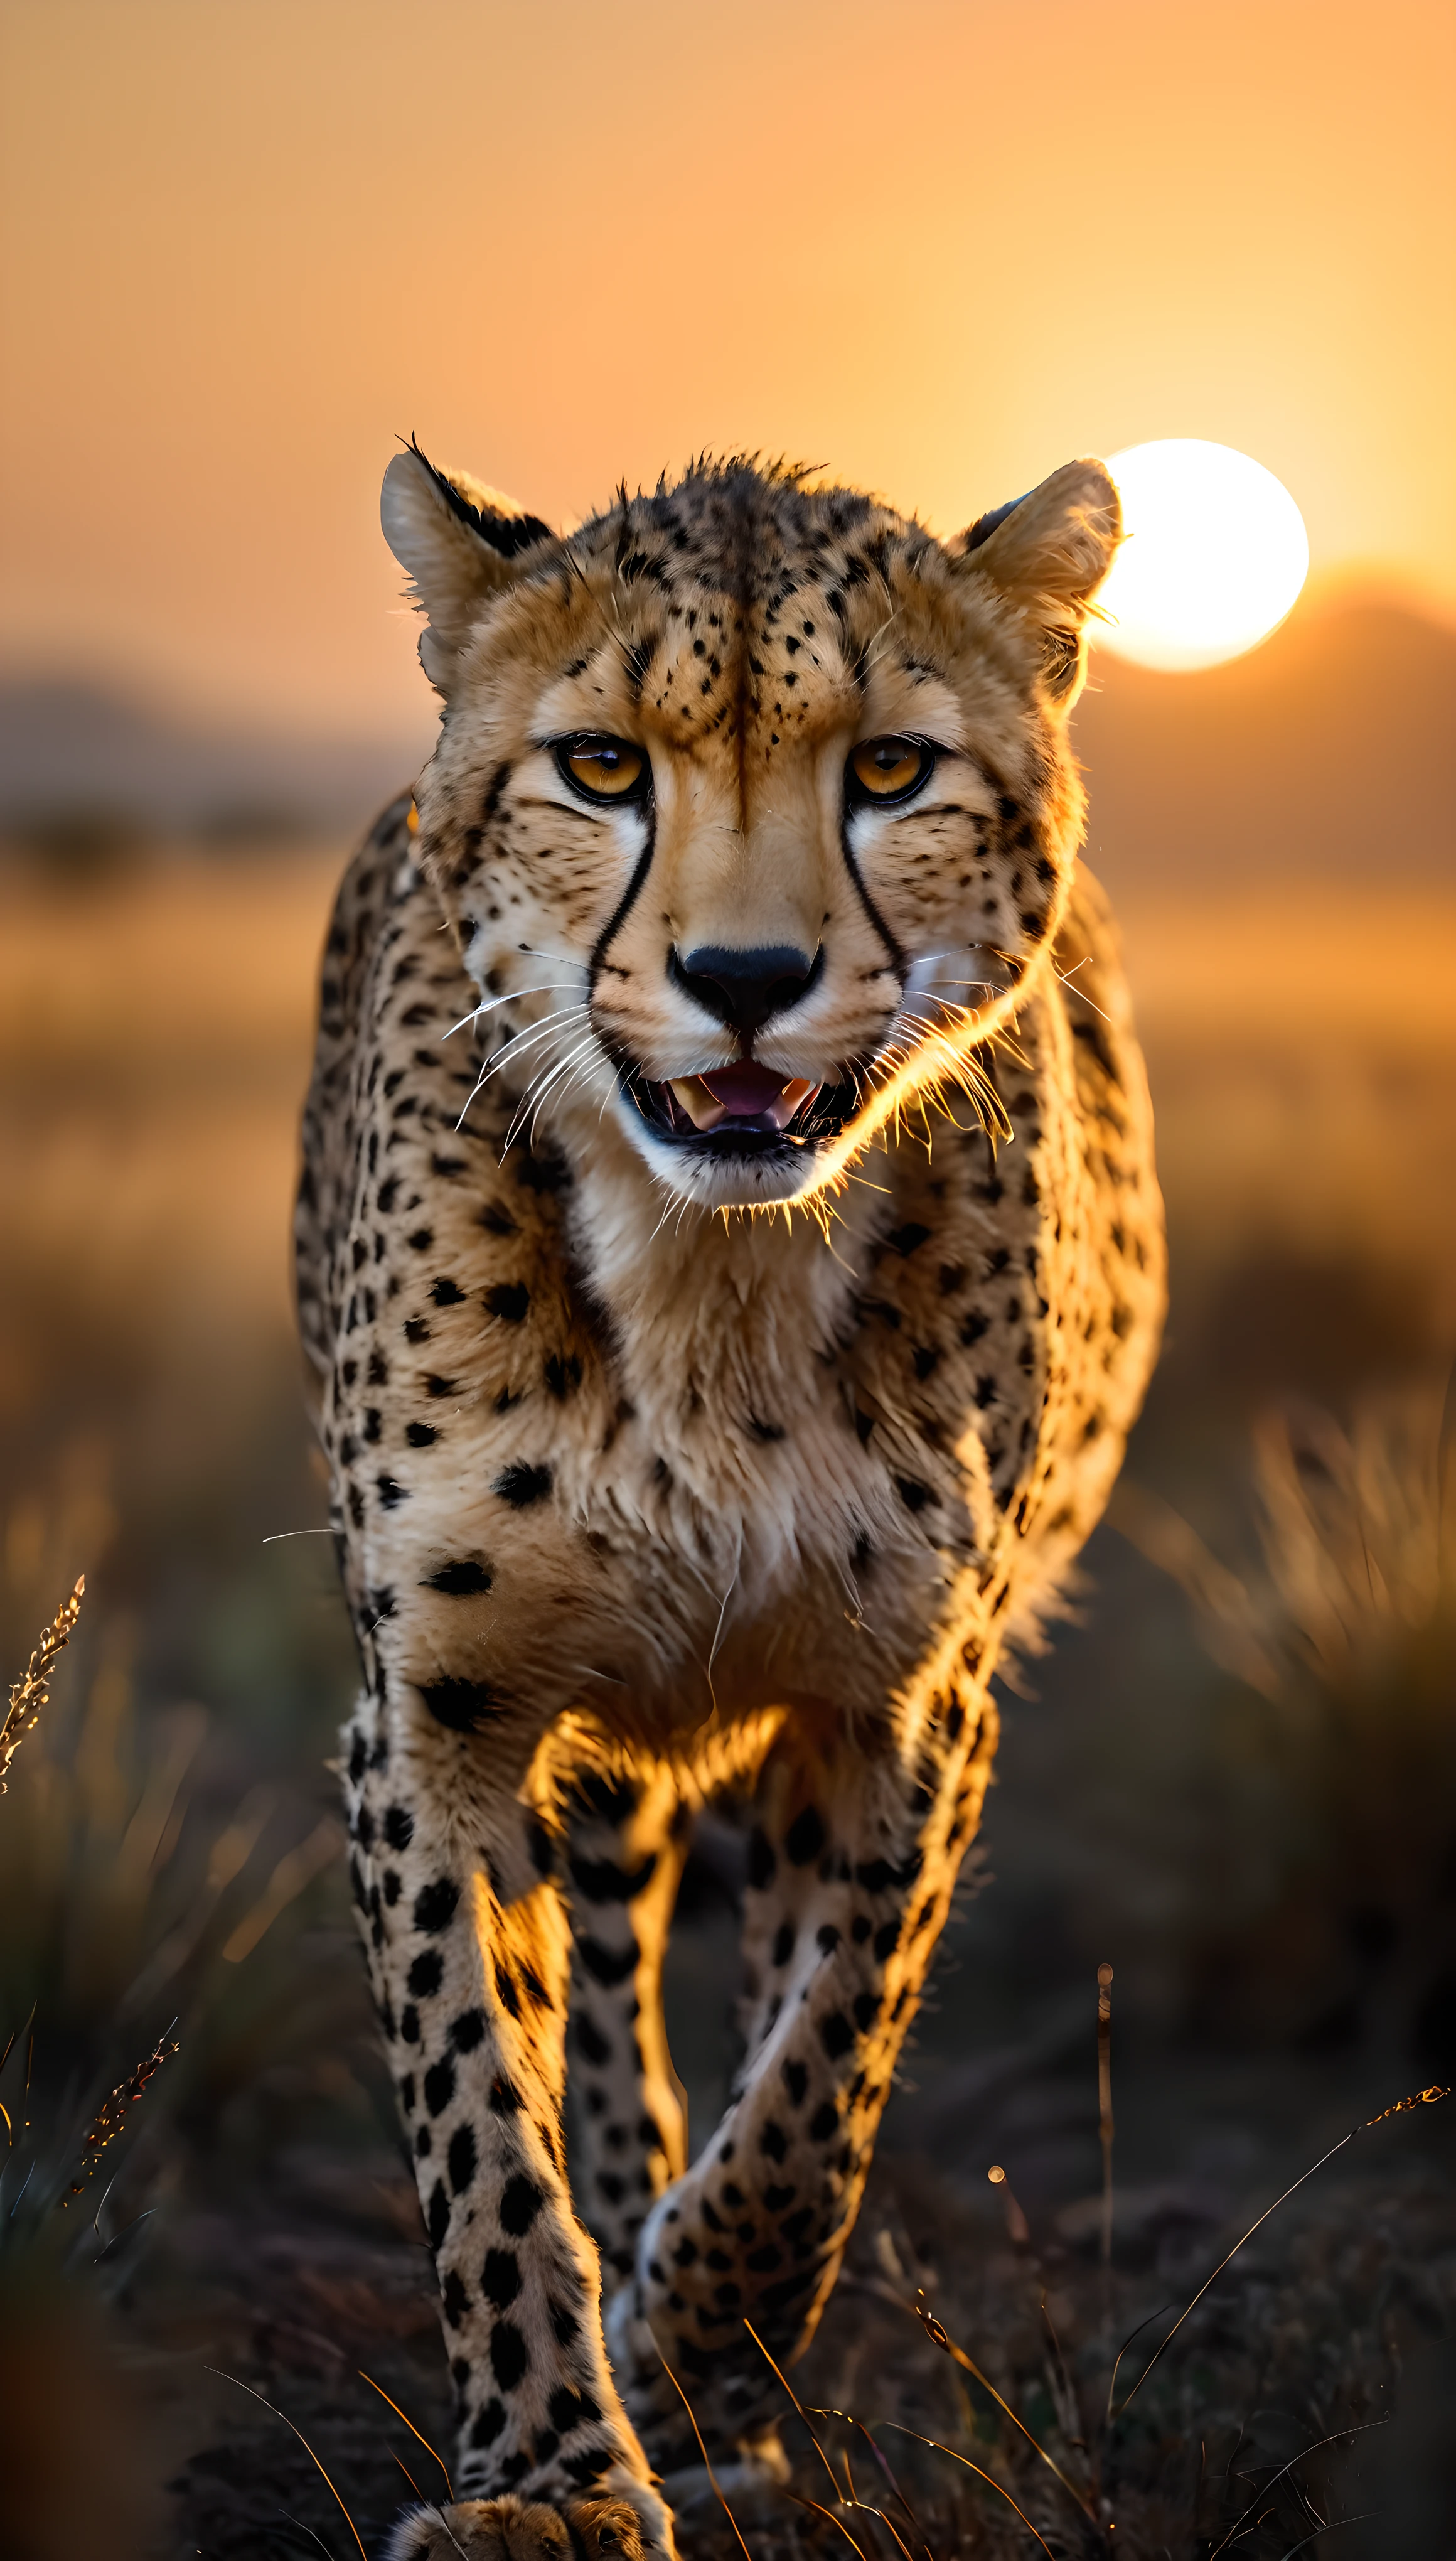 ((Masterpiece in maximum 16K resolution):1.6),((soft_color_photograpy:)1.5), ((Ultra-Detailed):1.4),((Movie-like still images and dynamic angles):1.3). | (Cinematic photo of a cheetah, galloping, african savannah, sunset sky, dramatic lighting, detailed fur texture, powerful muscles, blurred grass, cinematic composition, vibrant colors), ((detailed cheetah, detailed savannah, , sunset, golden hour lighting, vibrant colors):1.2), (cinematic lens), (exotic animal), (fierce), (delightful atmosphere), (aesthetic photography style), (visual experience),(Realism), (Realistic),award-winning graphics, dark shot, film grain, extremely detailed, Digital Art, rtx, Unreal Engine, scene concept anti glare effect, All captured with sharp focus. | Rendered in ultra-high definition with UHD and retina quality, this masterpiece ensures anatomical correctness and textured skin with super detail. With a focus on high quality and accuracy, this award-winning portrayal captures every nuance in stunning 16k resolution, immersing viewers in its lifelike depiction. | ((perfect_composition, perfect_design, perfect_layout, perfect_detail, ultra_detailed)), ((enhance_all, fix_everything)), More Detail, Enhance.